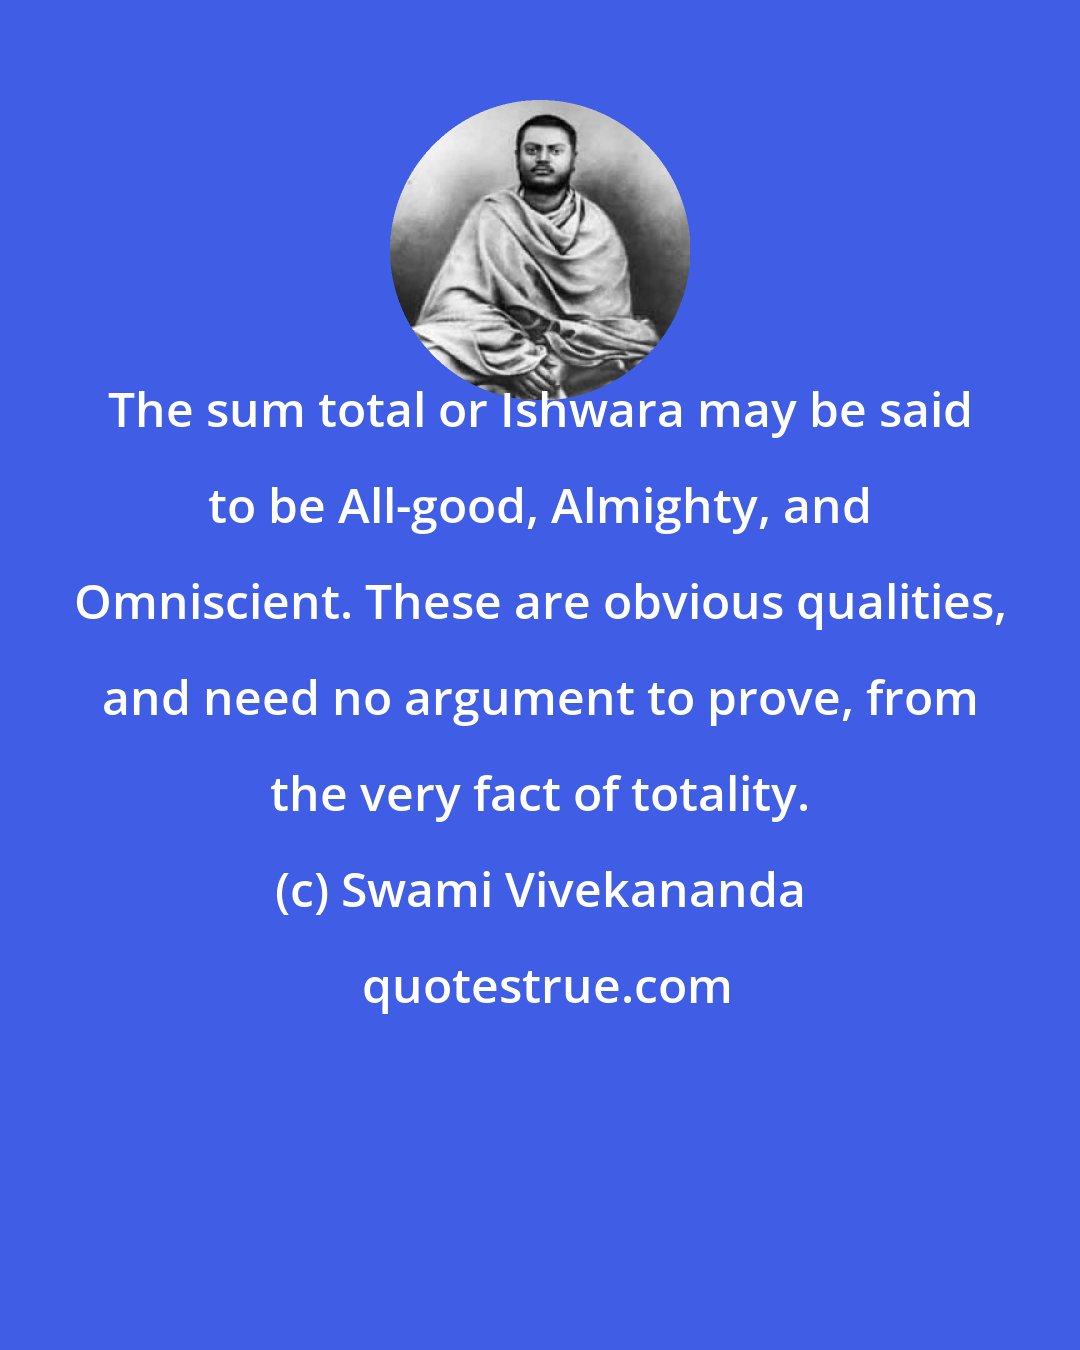 Swami Vivekananda: The sum total or Ishwara may be said to be All-good, Almighty, and Omniscient. These are obvious qualities, and need no argument to prove, from the very fact of totality.